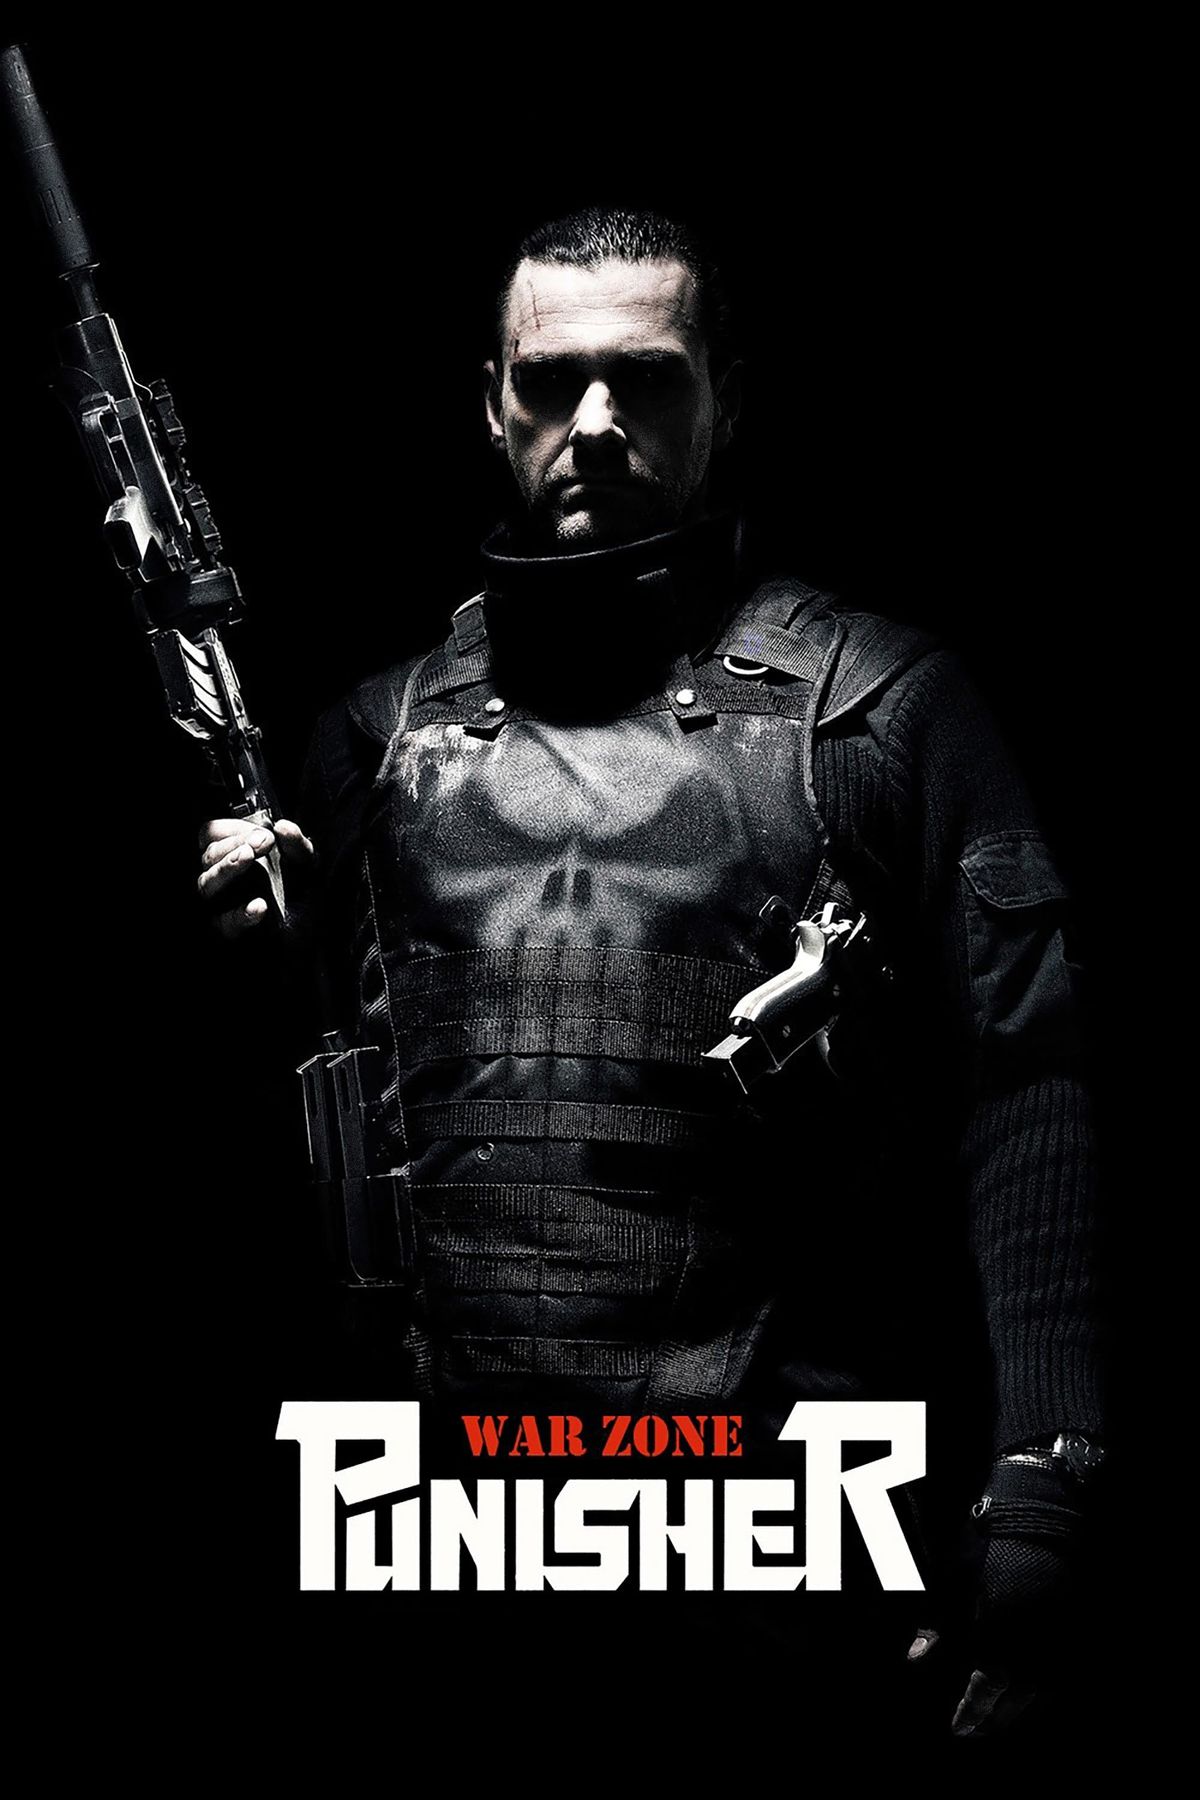 The Projection Booth Podcast: Episode 226: Punisher: War Zone (2008)